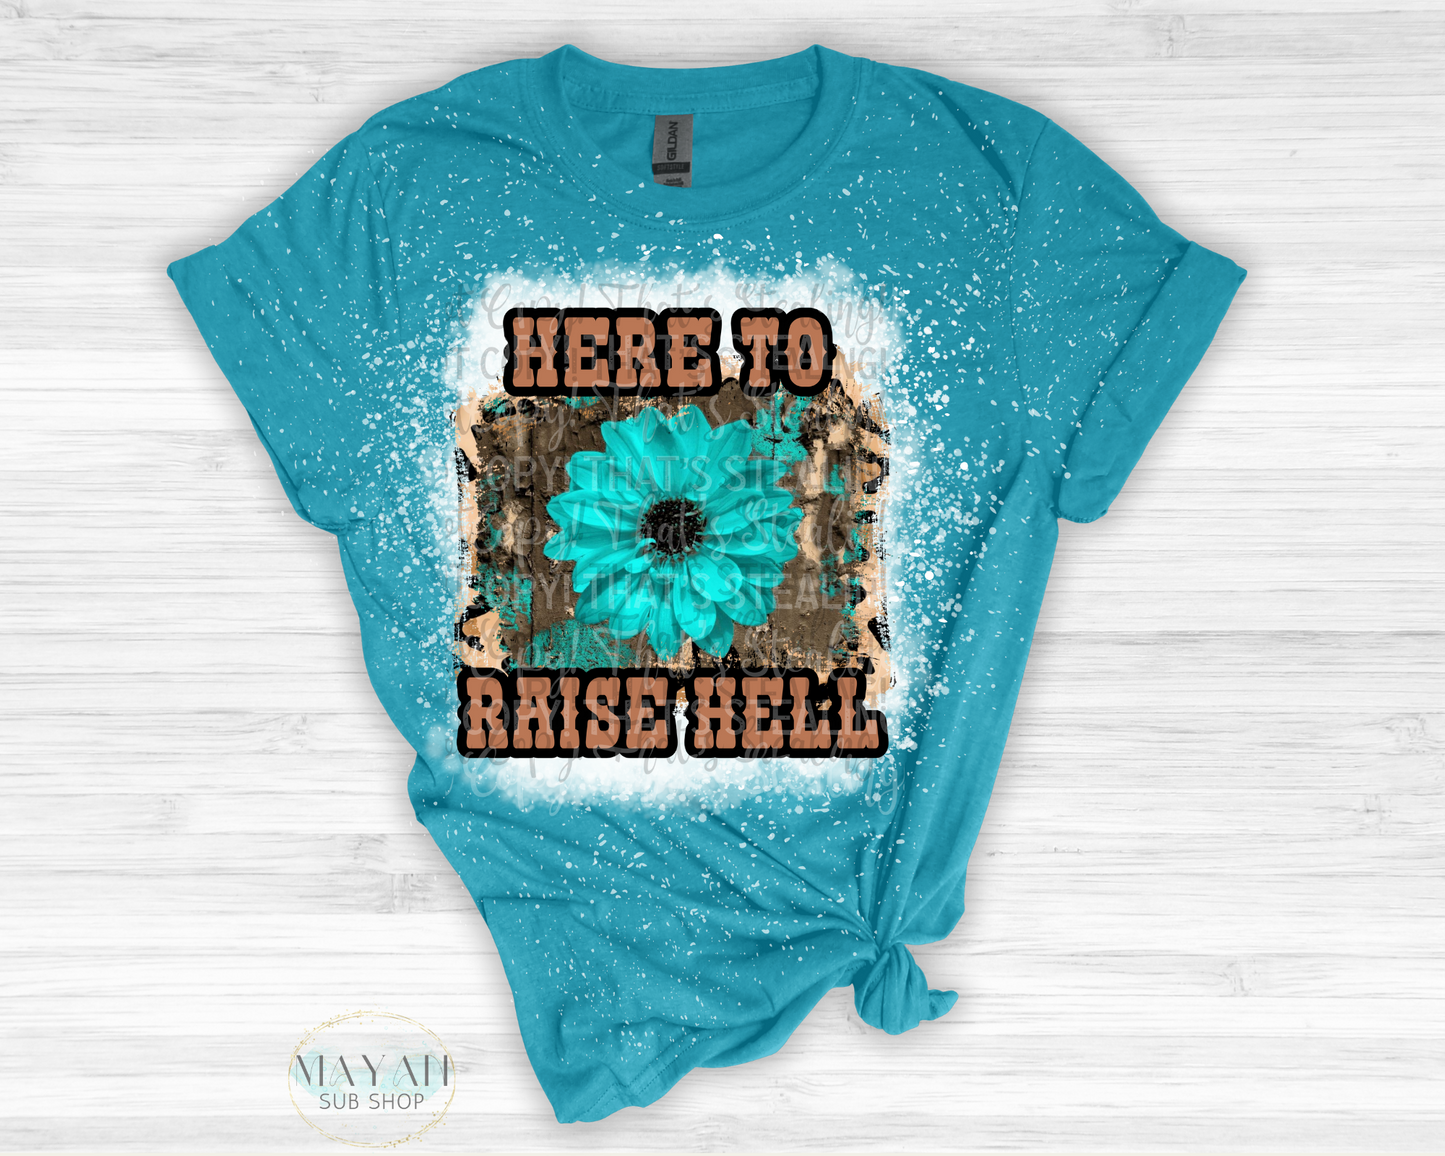 Here To Raise Hell Bleached Shirt - Mayan Sub Shop